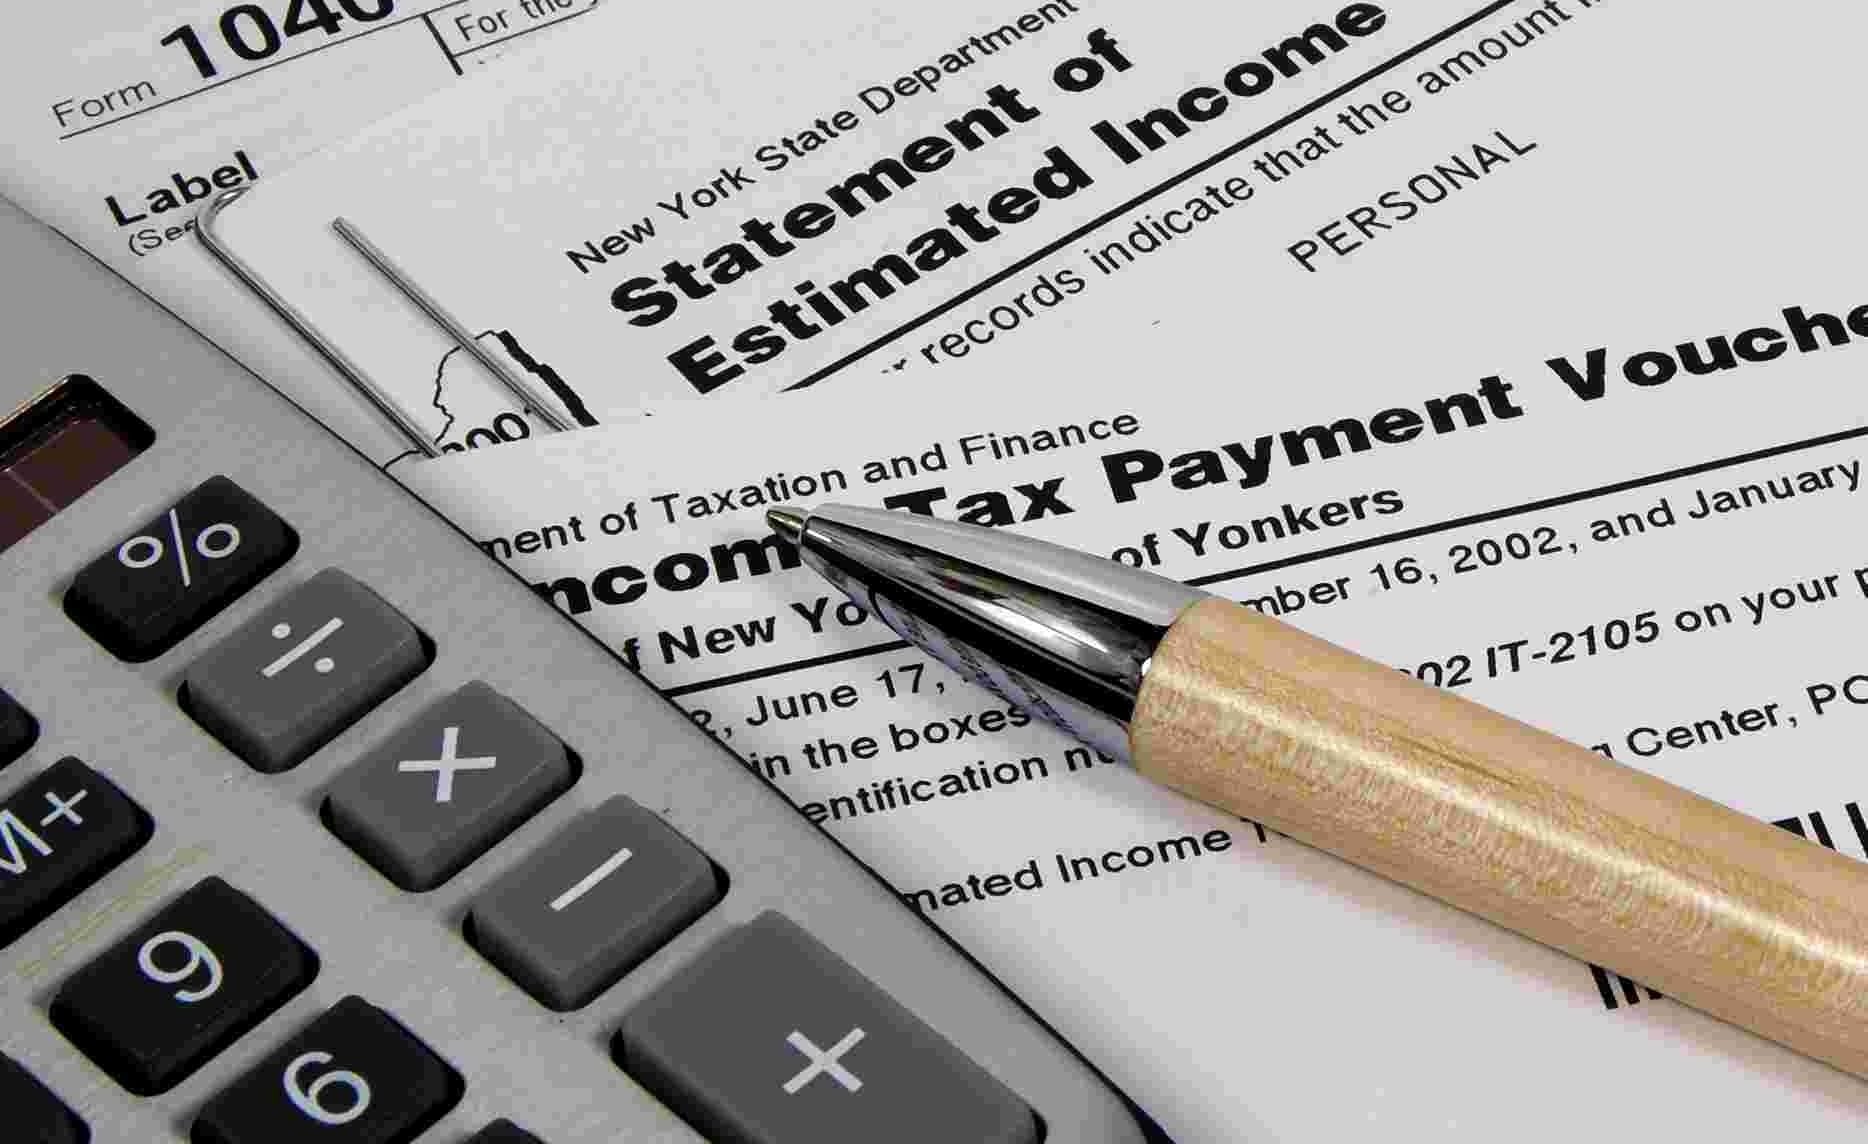 Review Your Taxes This Summer to Prevent a Surprise Next Spring